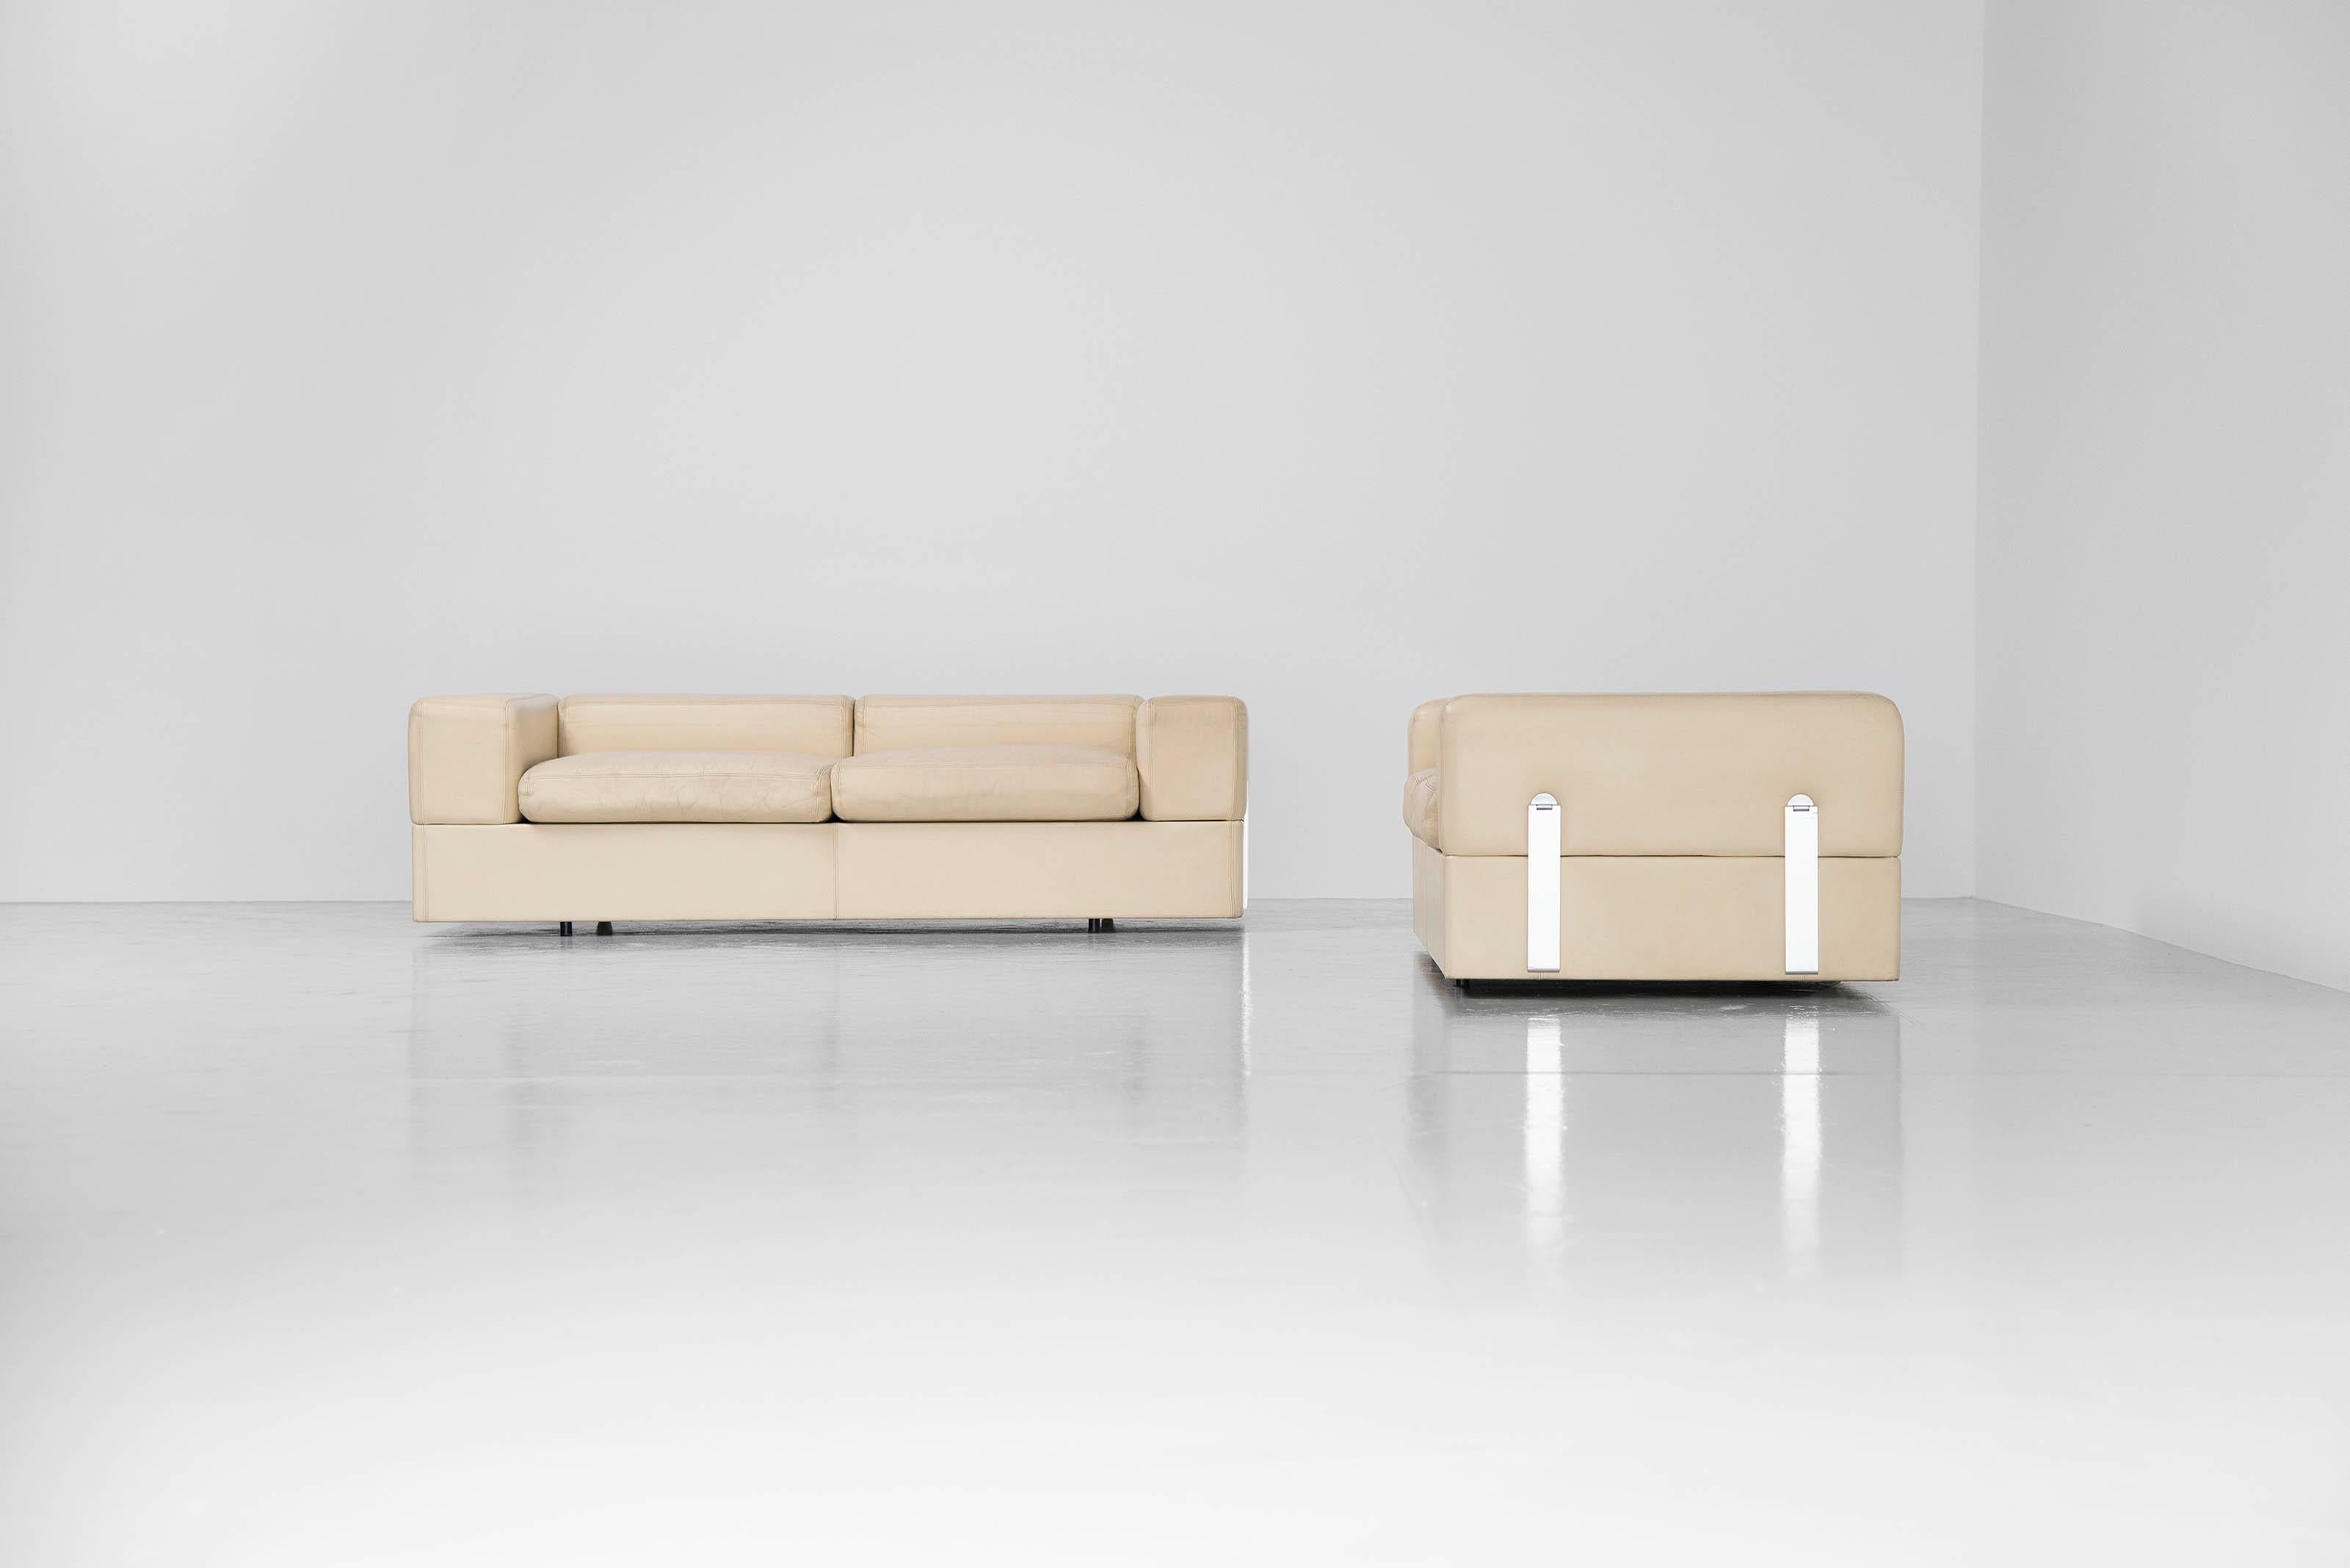 Very nice and functional daybed sofa's model 711 designed by Tito Agnoli and manufactured by Cinova, Italy 1968. The sofa's have a wood structure covered with foam and off white leather, with metal spring seat bottom. A mattress covered with white